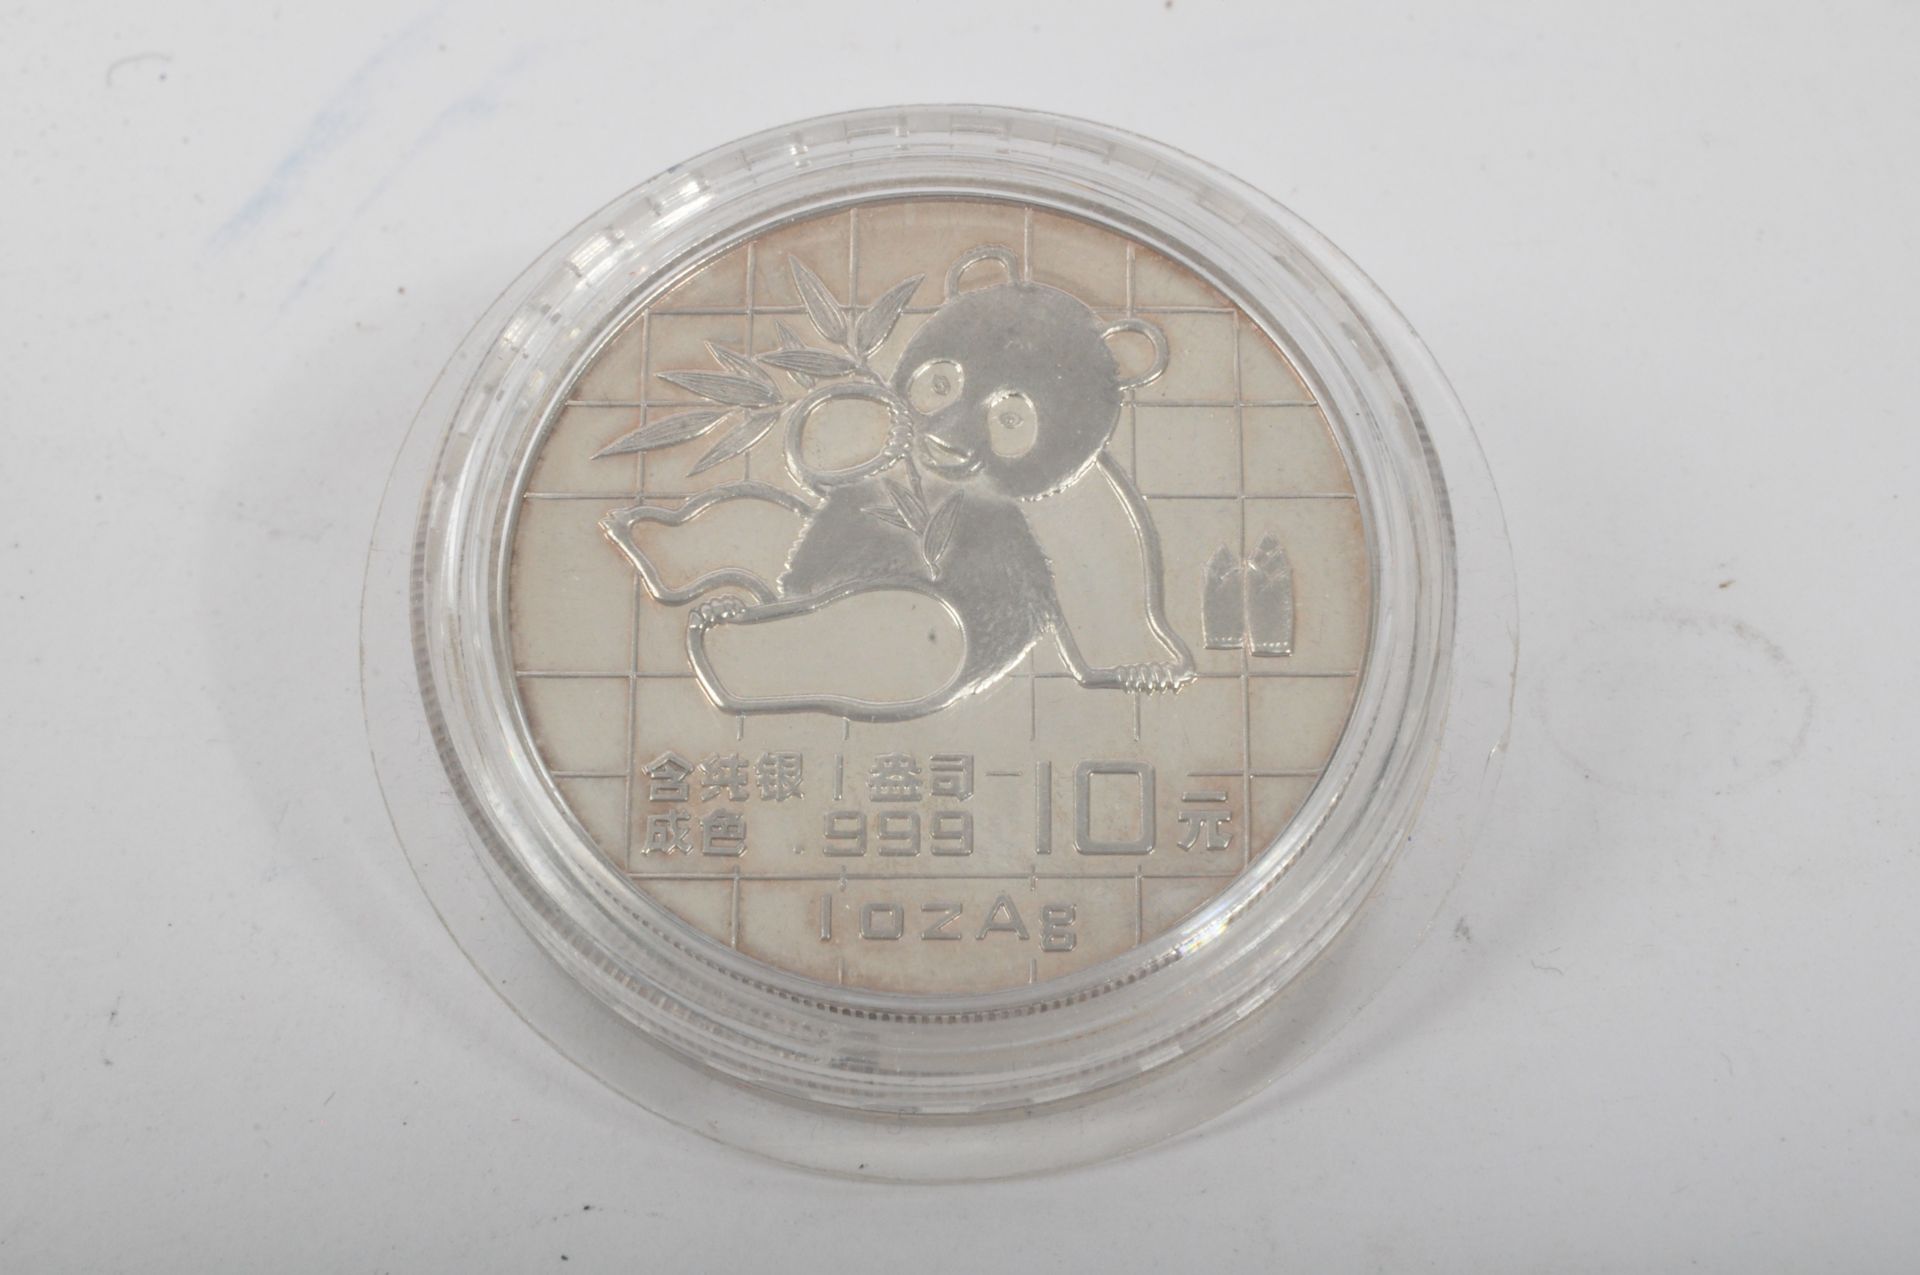 WESTMINSTER COLLECTION - PANDA CHINA SILVER COIN COLLECTION - Bild 11 aus 41